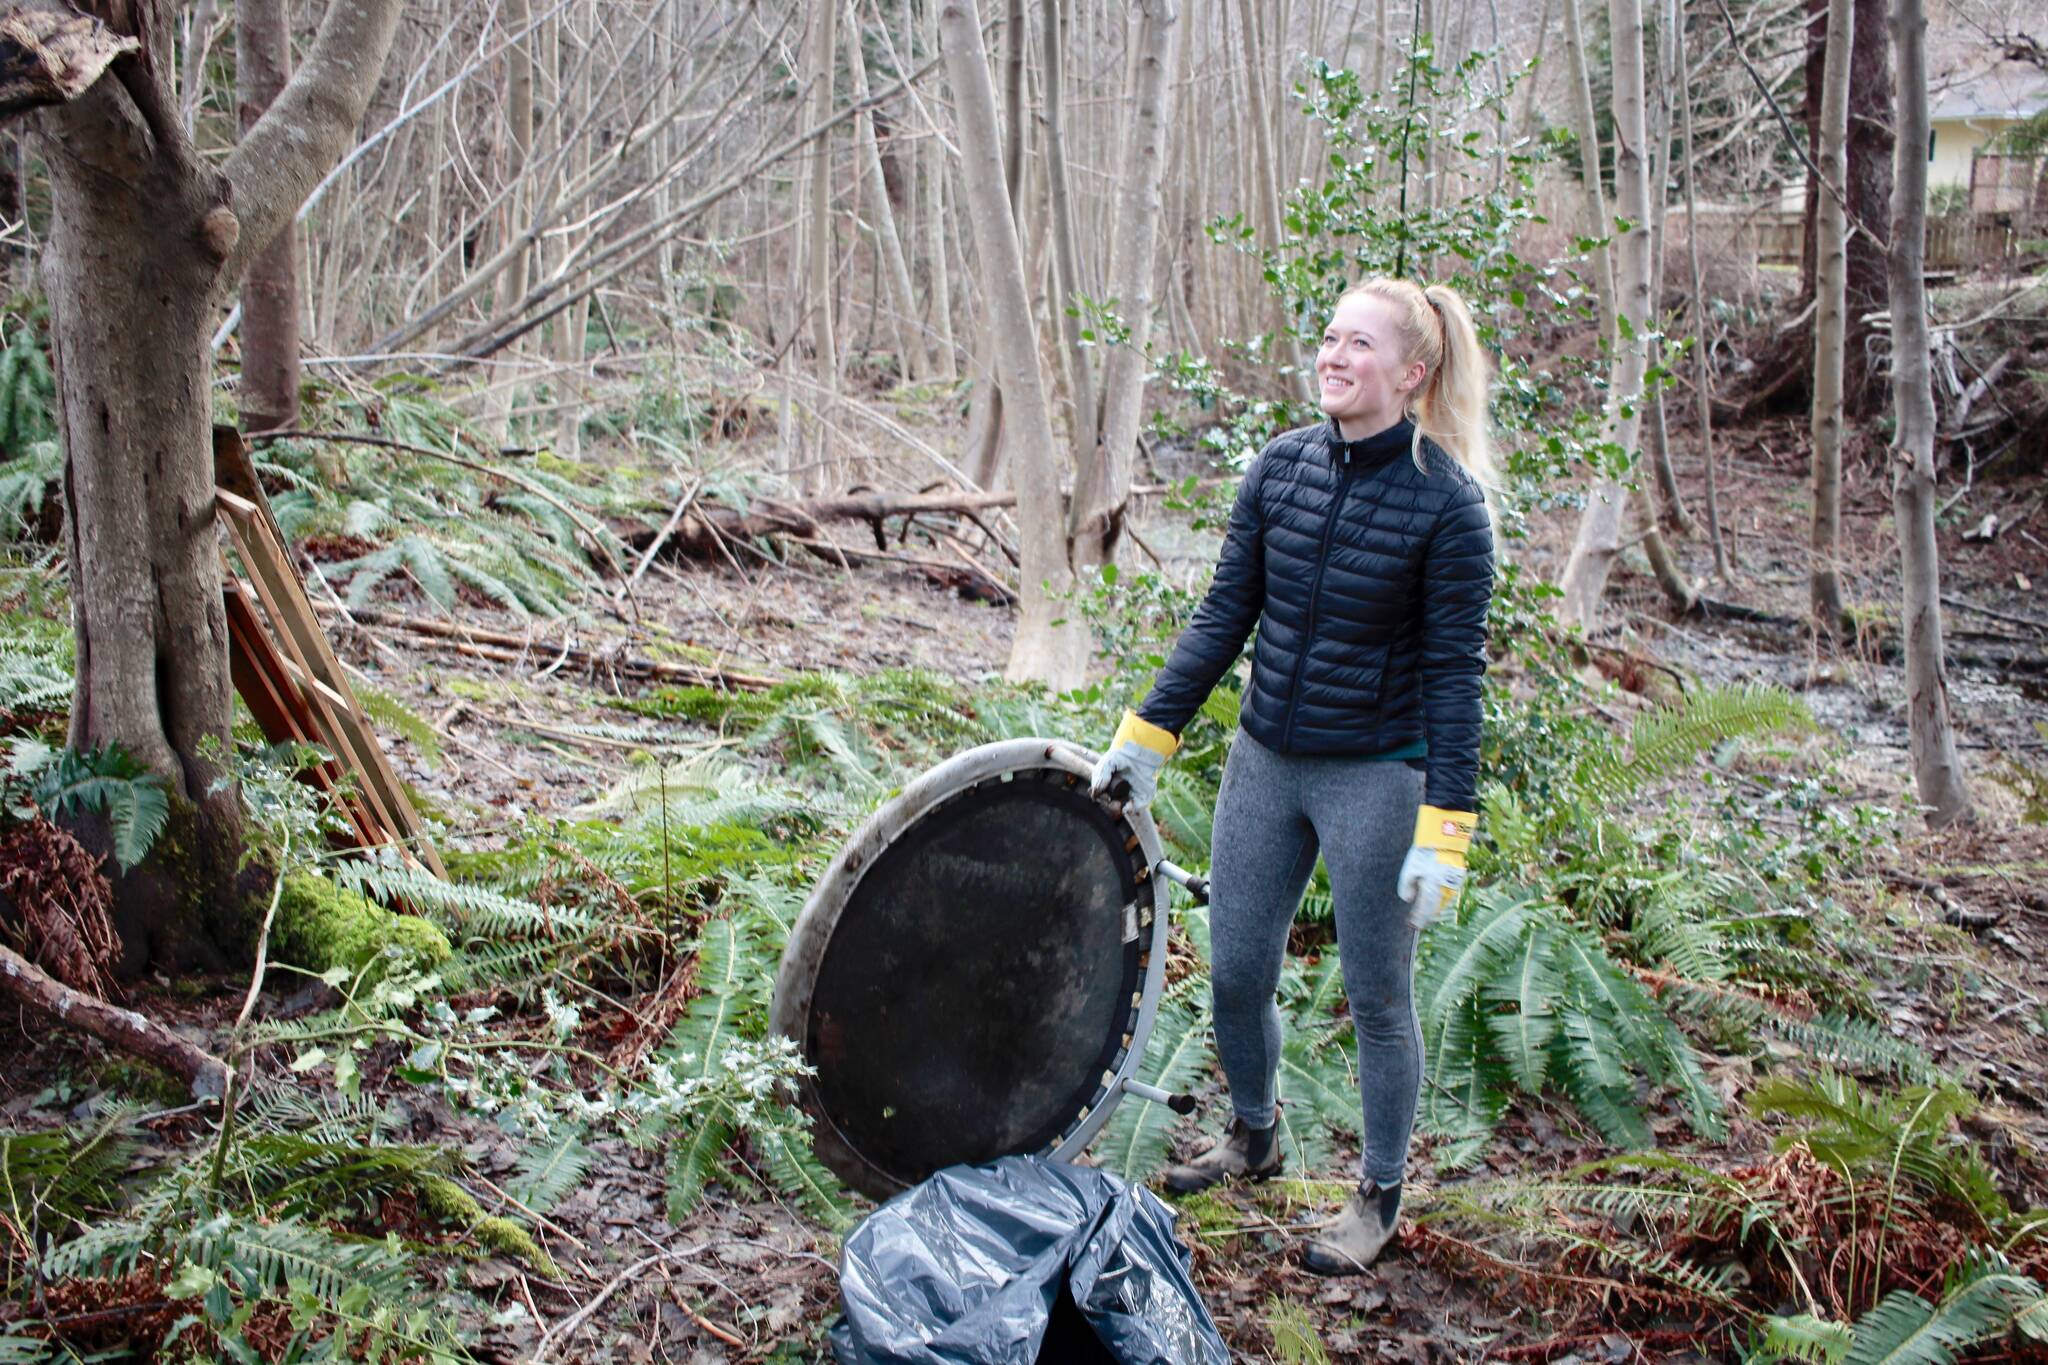 28020154_web1_220201-CRM-Streamkeepers-Bears-CLEANUP_3